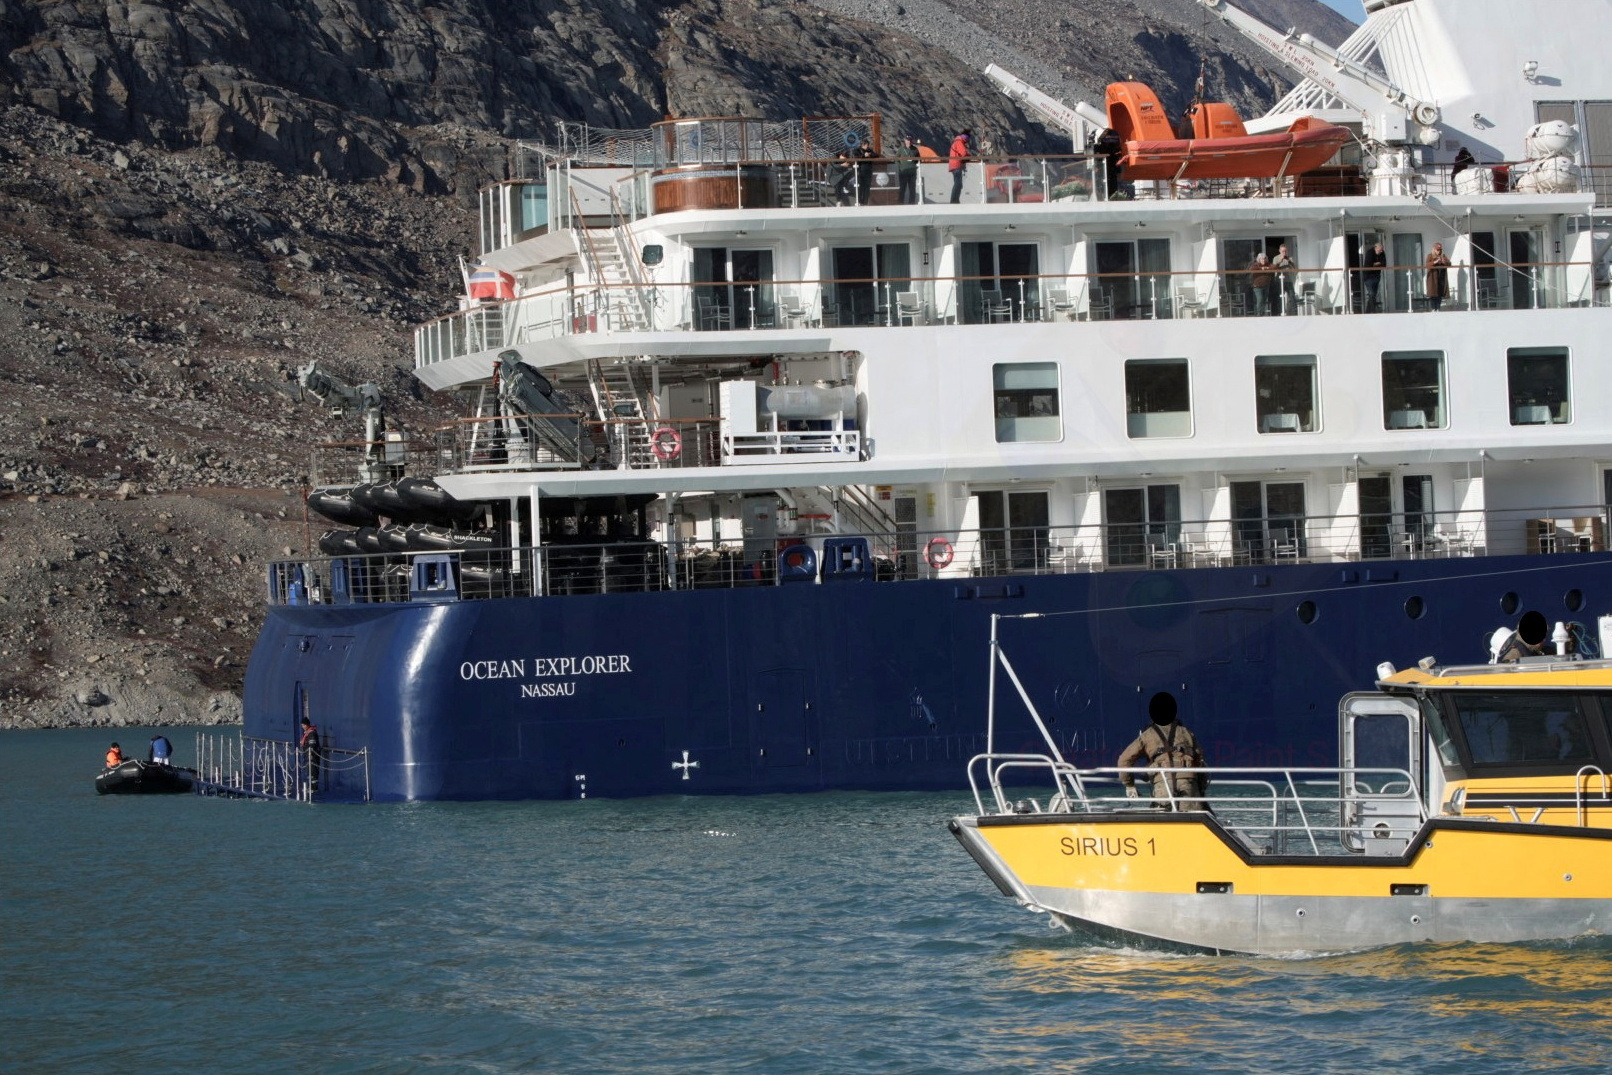 Luxury cruise ship carrying 206 people runs aground in remote Greenland